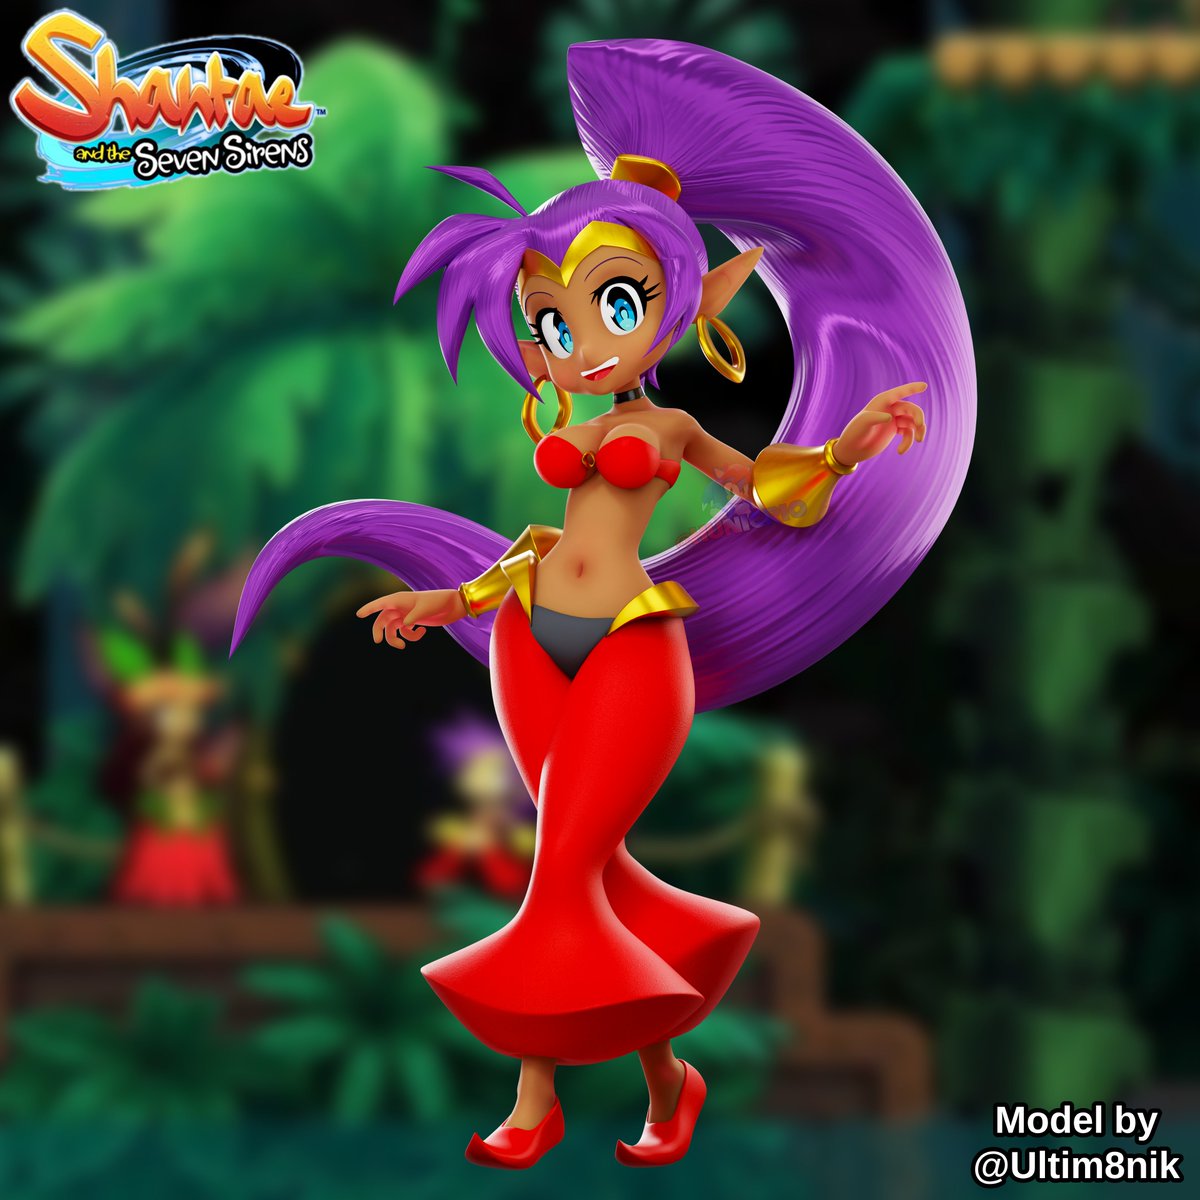 Shantae but with the best gift ever: her smile